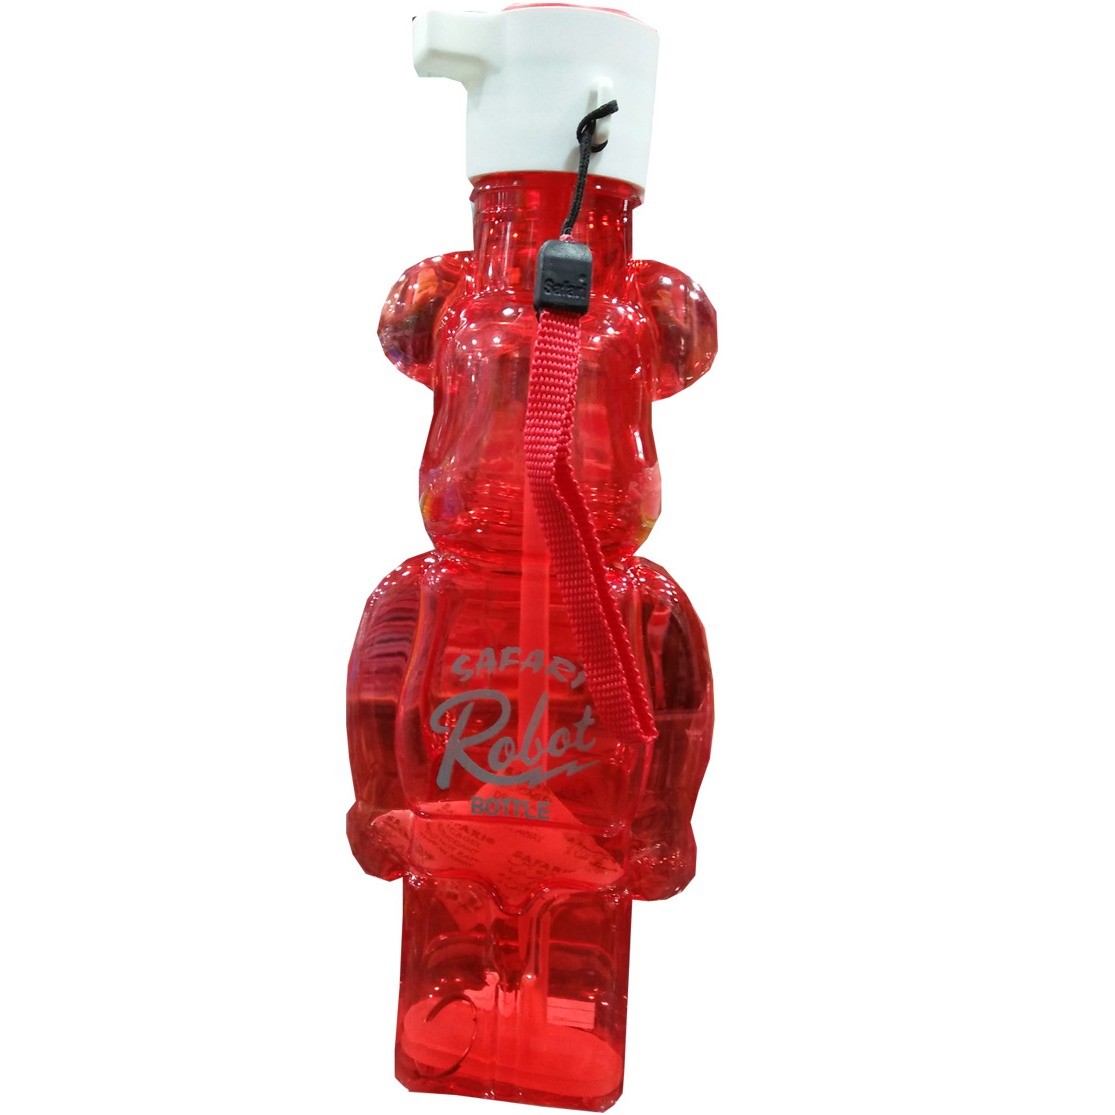 Safari Robot Style Water Bottle for Kids - Red